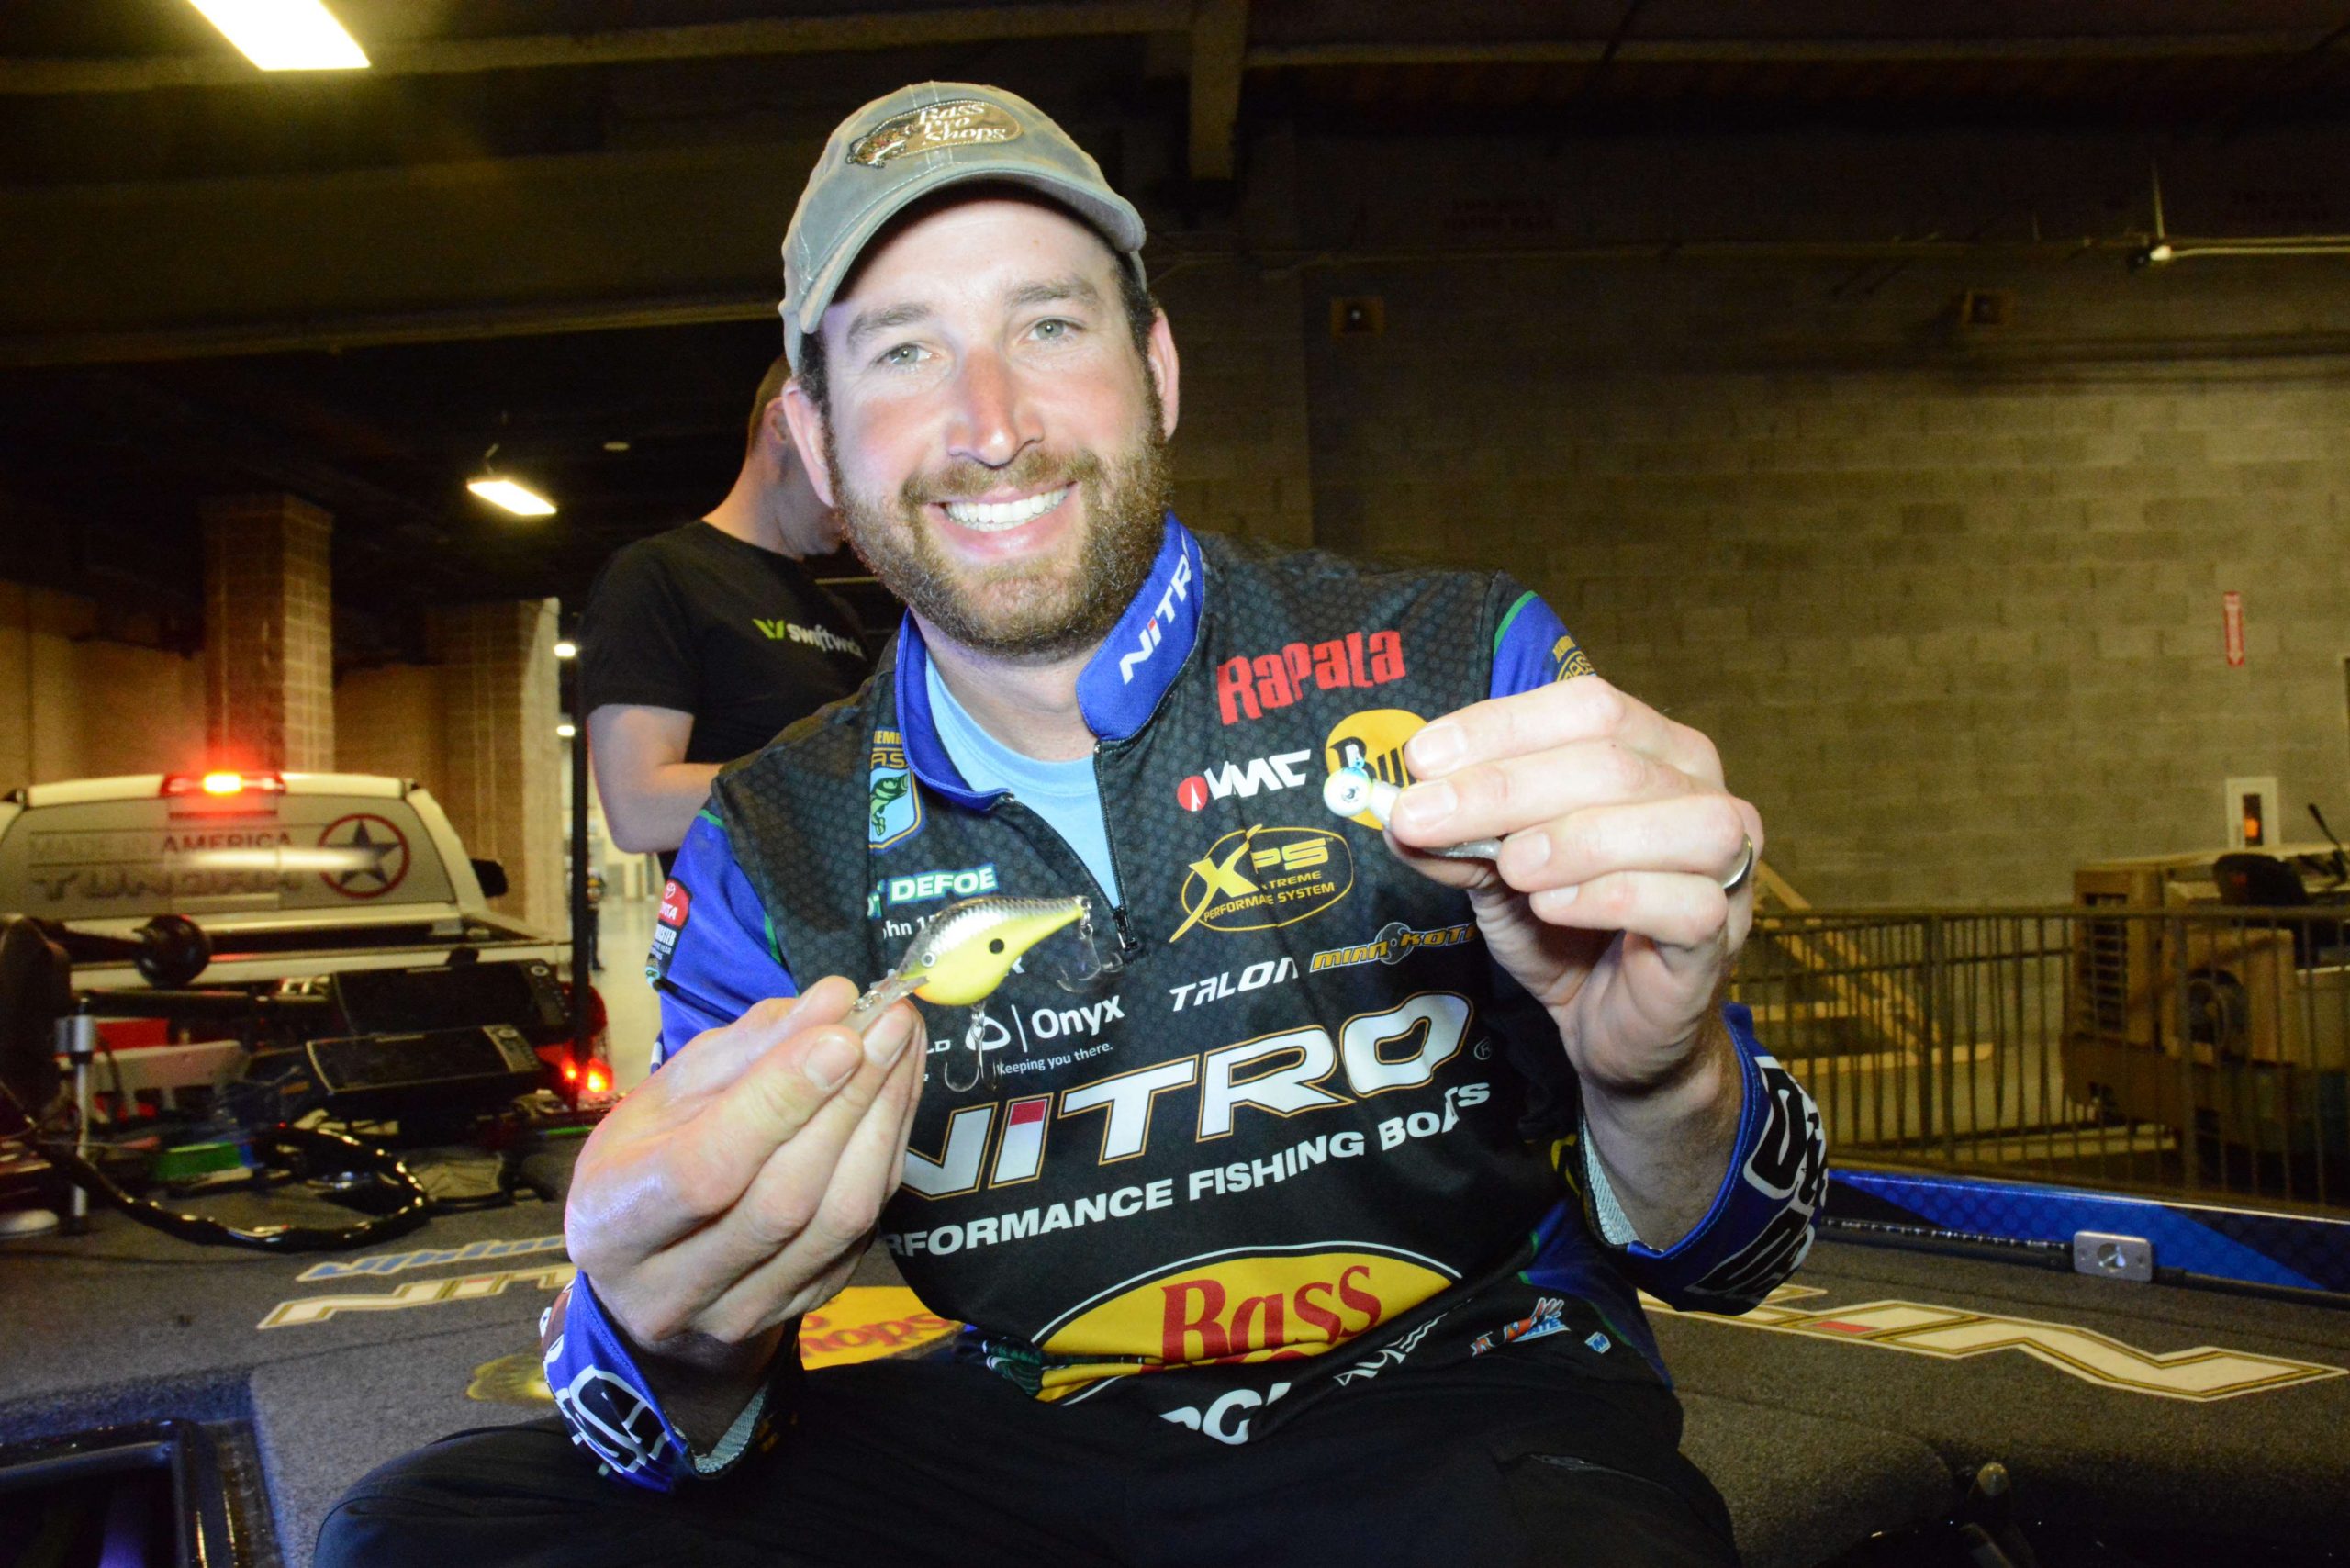 <b>Ott DeFoe</b><br>
The 10th place finisher caught most of his smallmouth using a 3/8-ounce VMC Neon Moon Eye jig with an unnamed white plastic fluke-style trailer. âI was fishing vertically with the jig and switched to a crankbait for largemouth,â said DeFoe. That choice was a Rapala DT 6 in Old School pattern. 